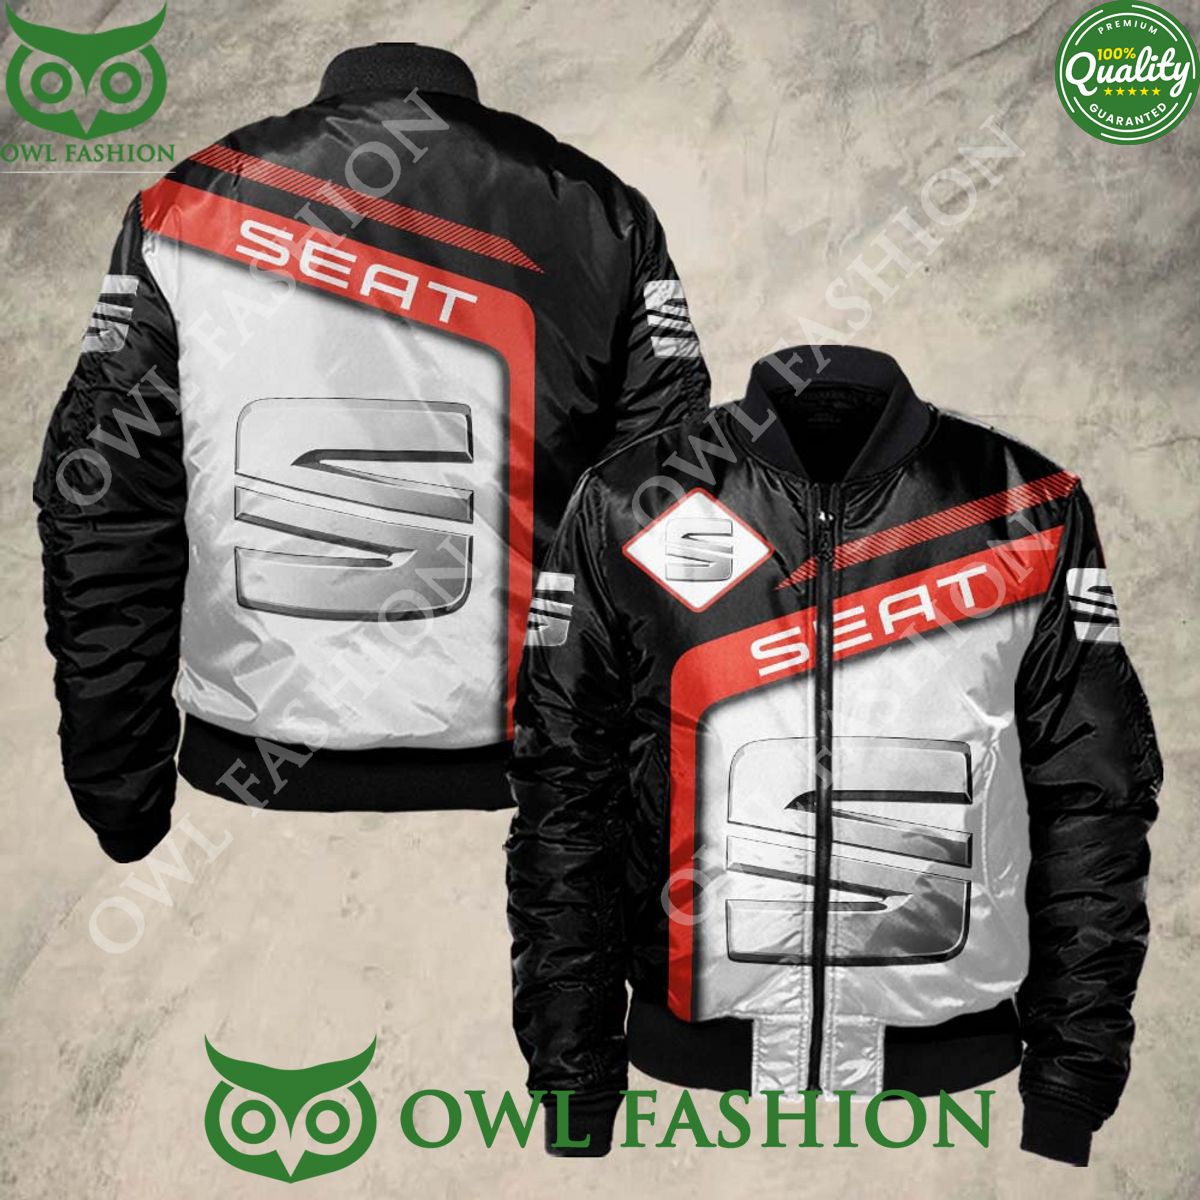 Seat Car Bomber Jacket Printed This place looks exotic.